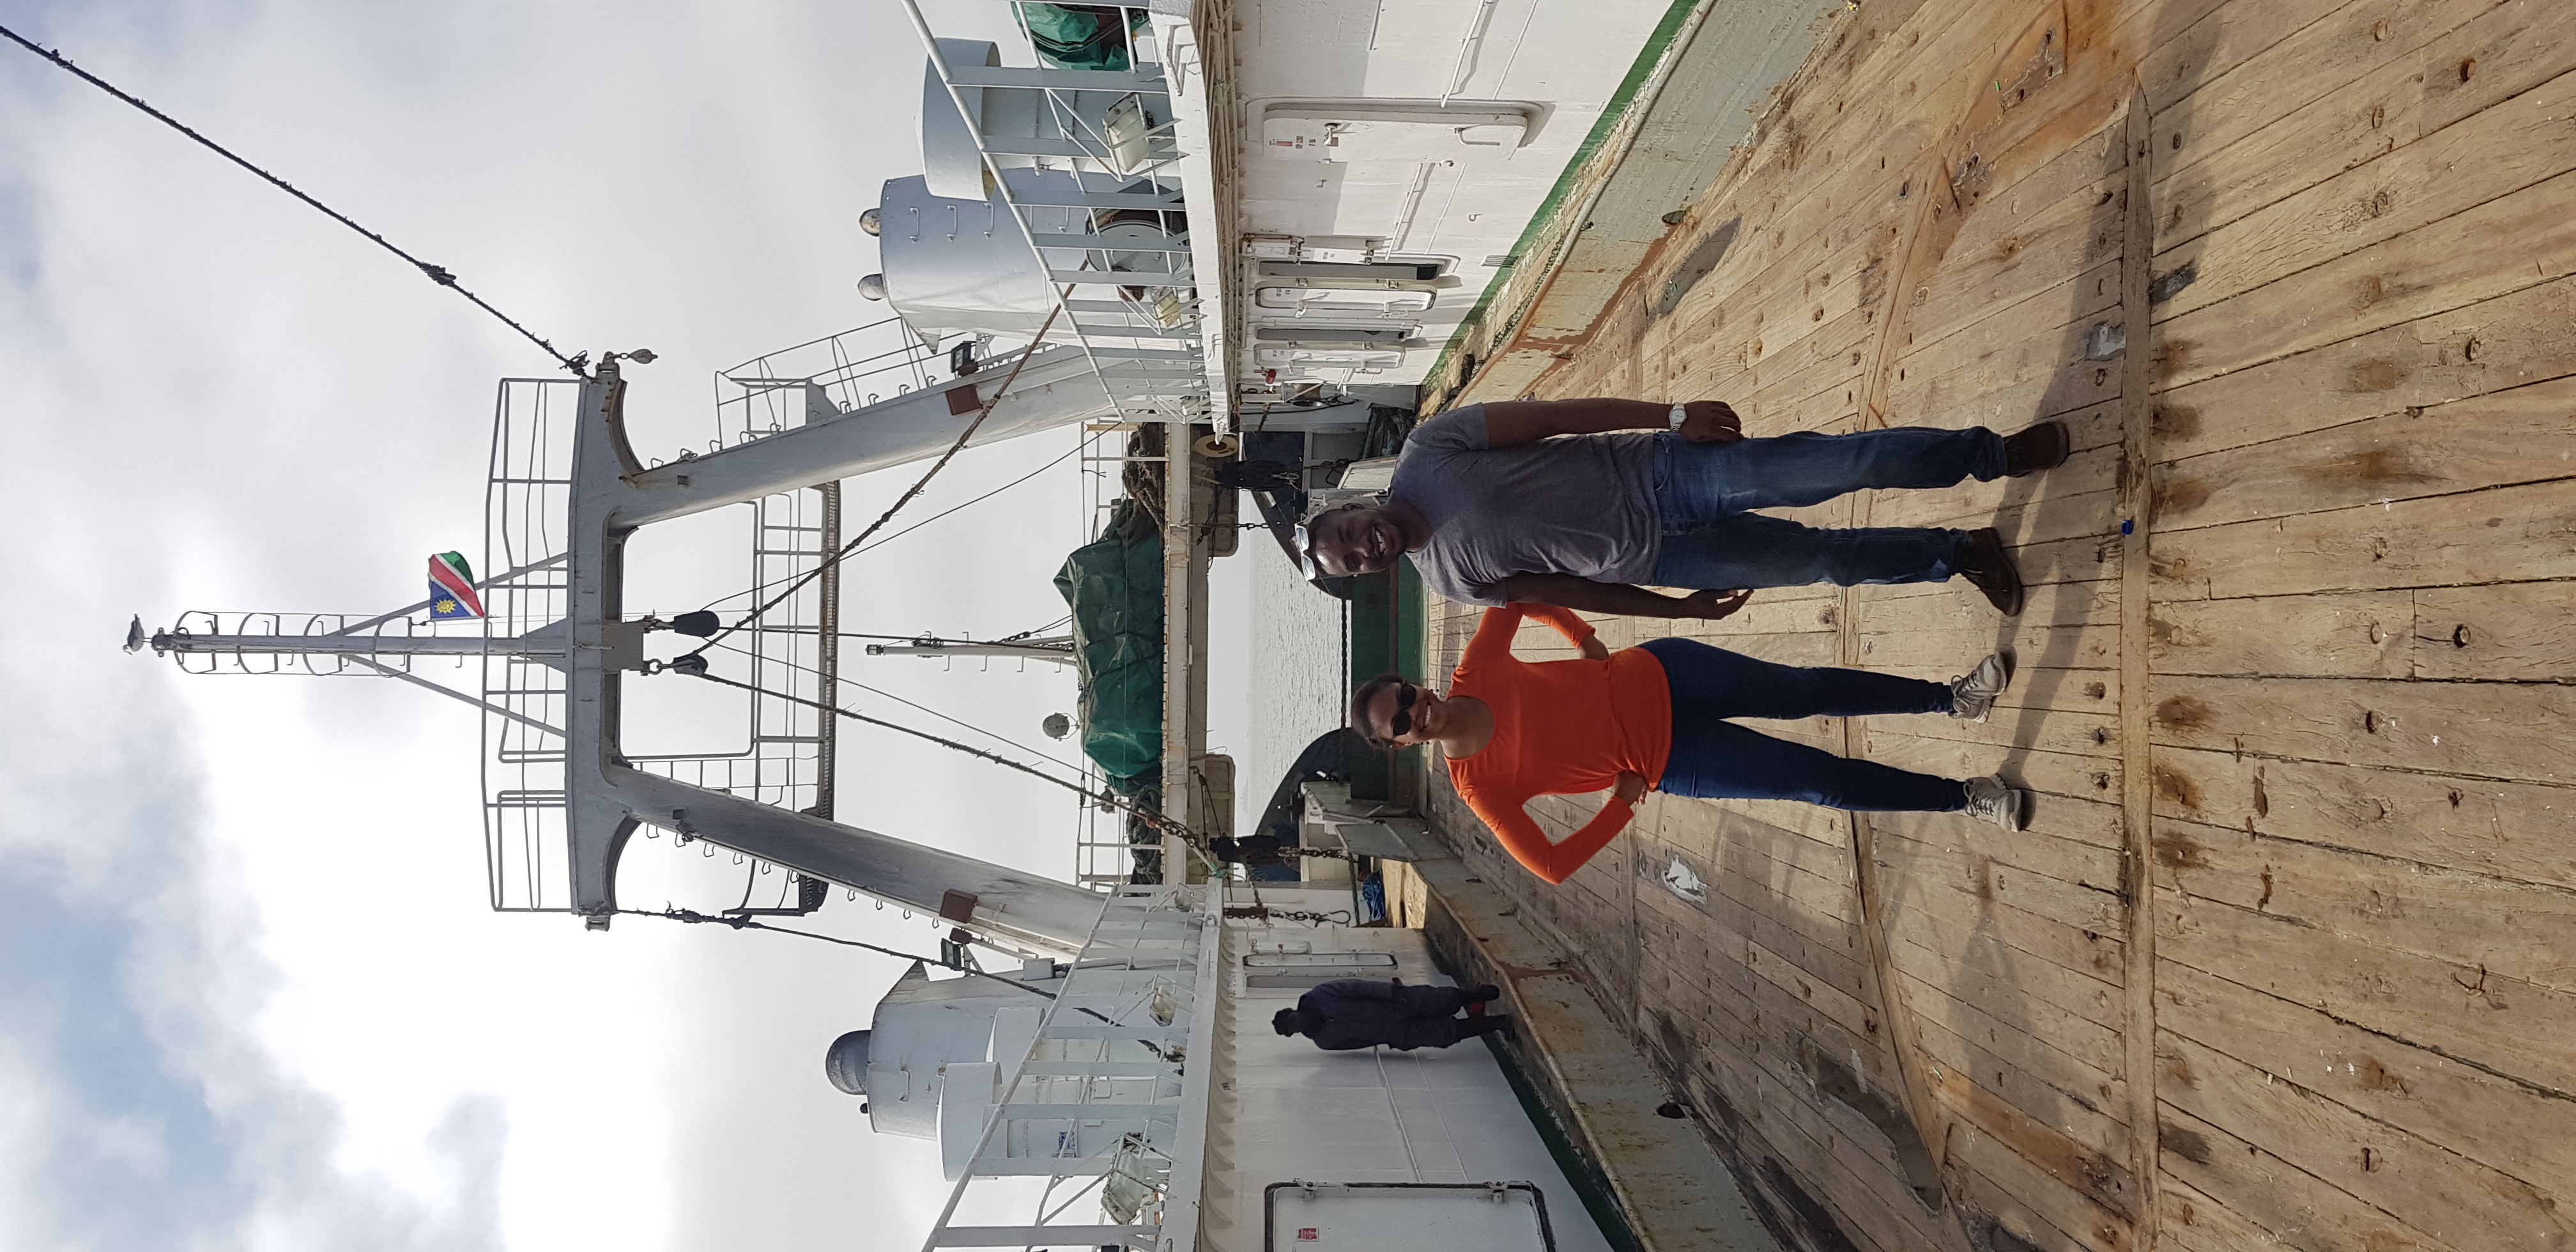 Sam and Titus from ATF on freezer trawler c Albatross Task Force